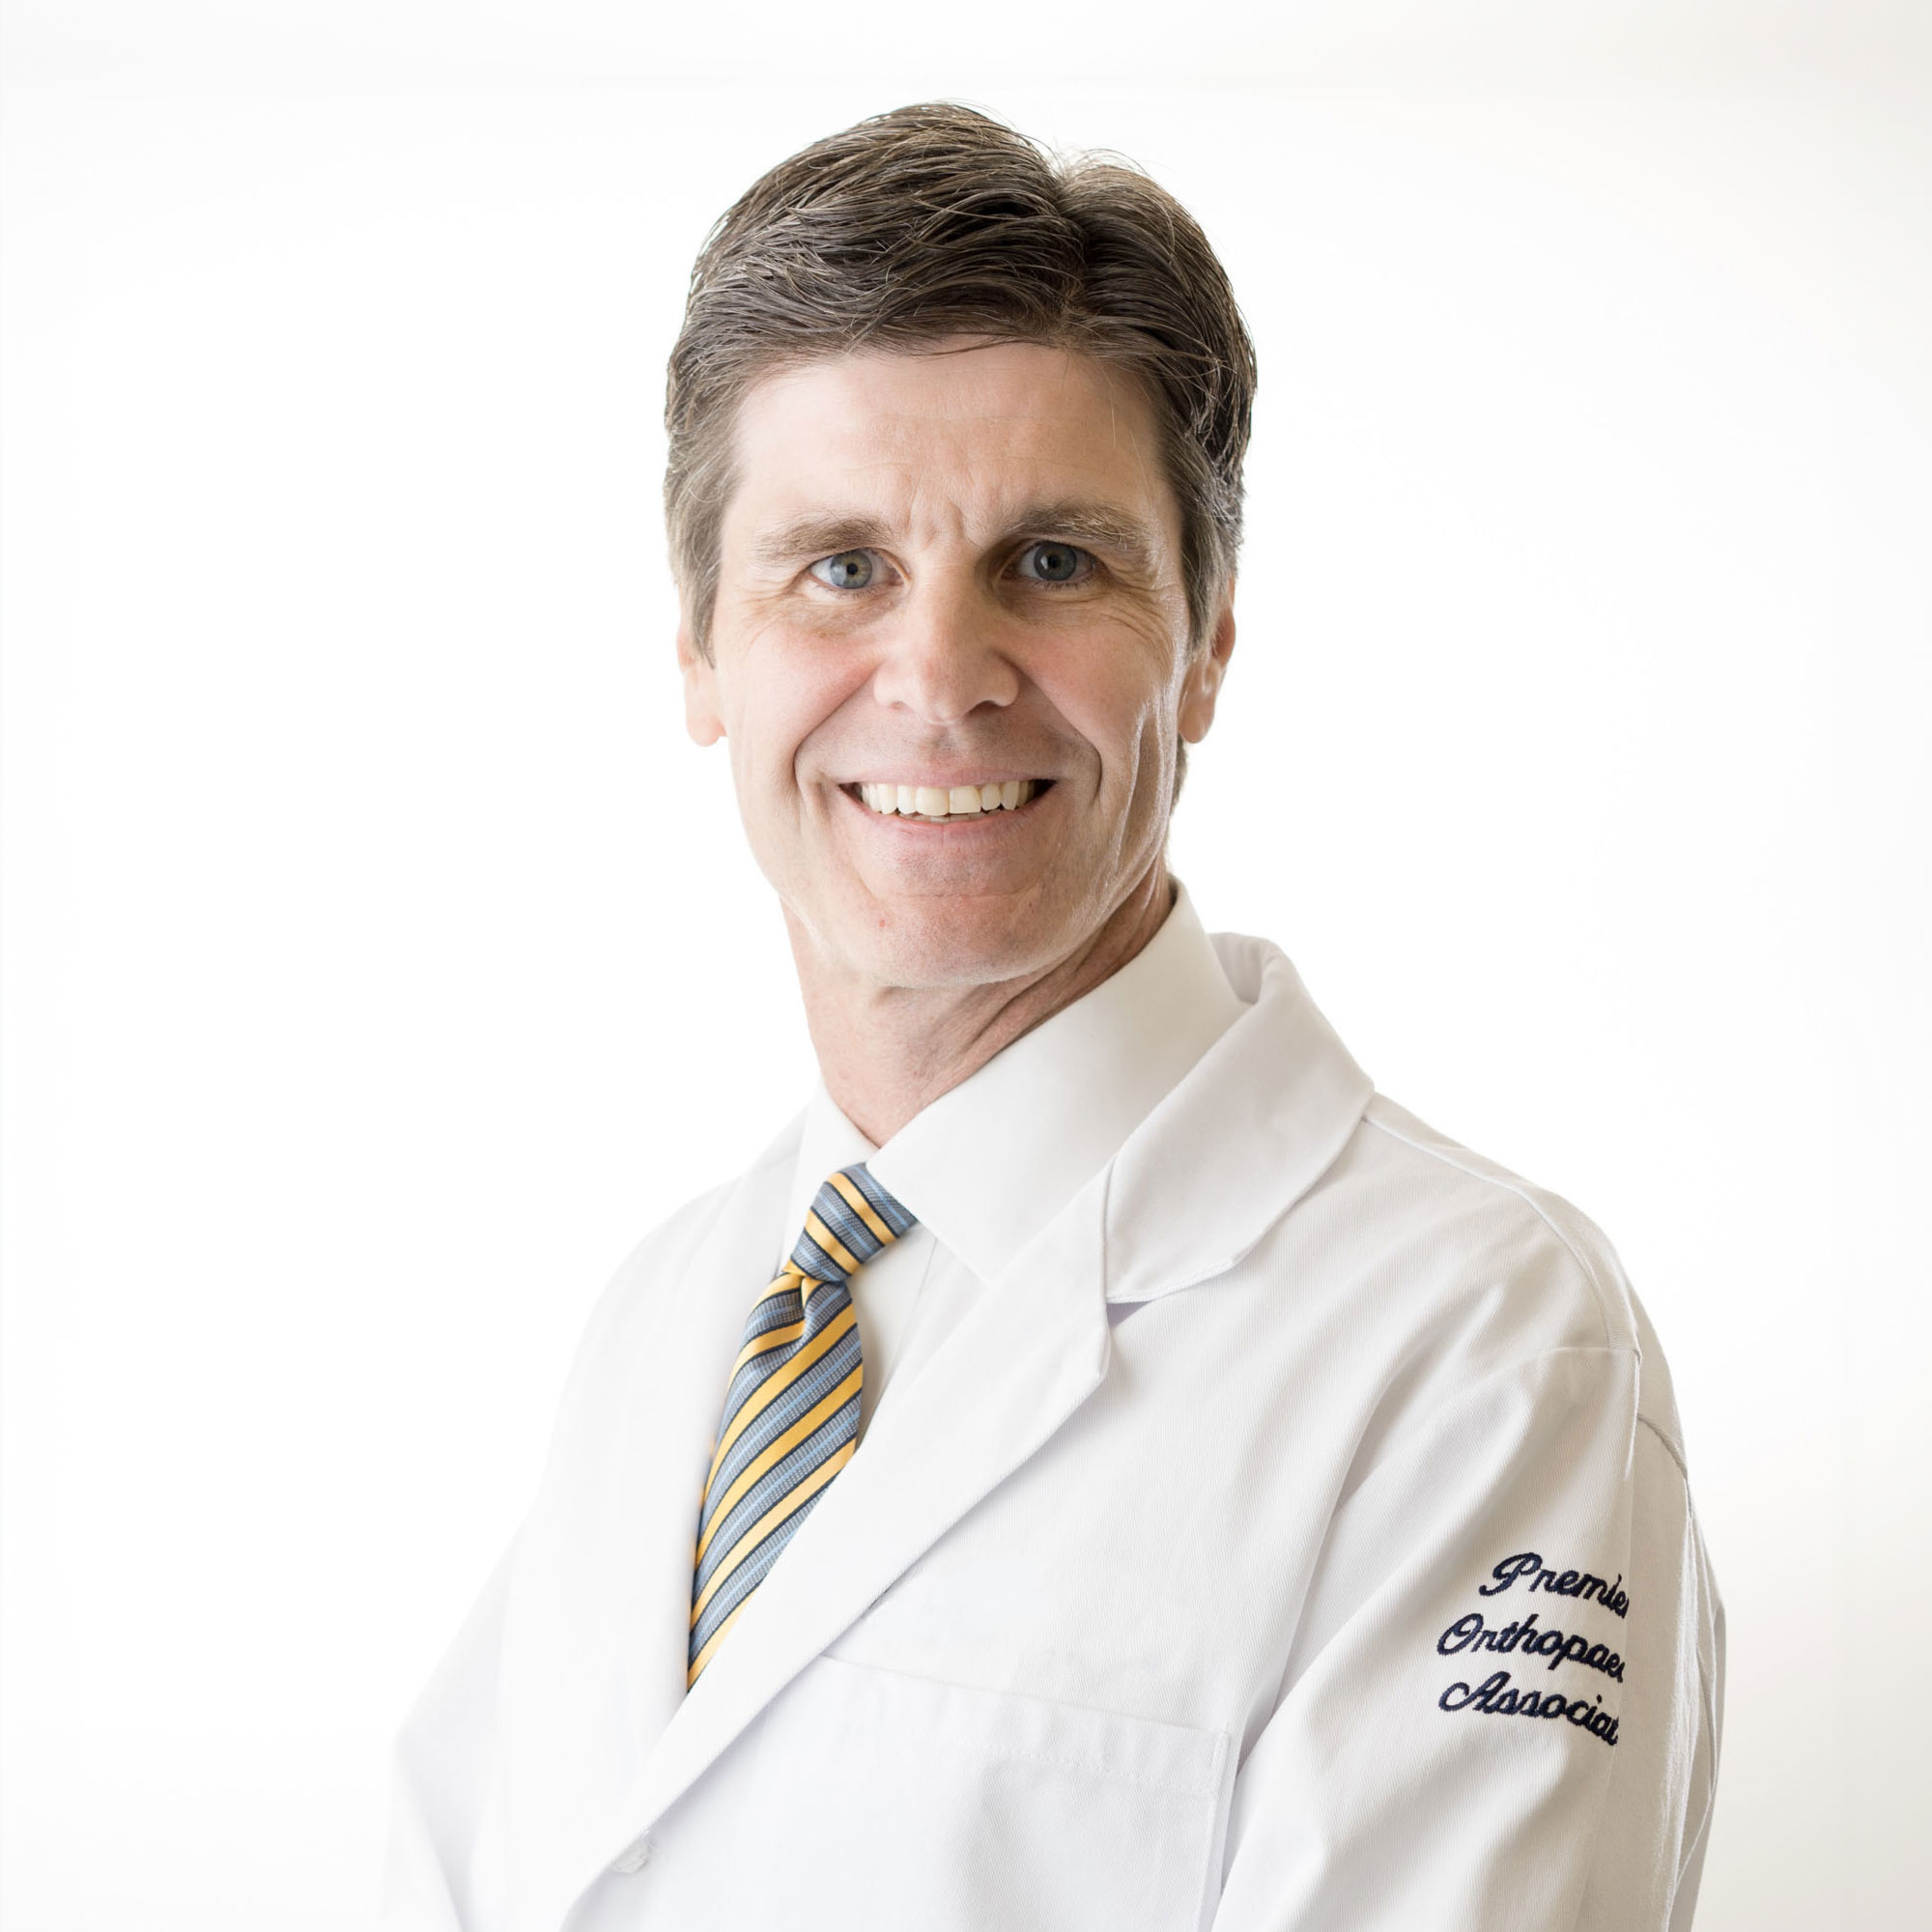 Laurence N. Fitzhenry, IV, MD